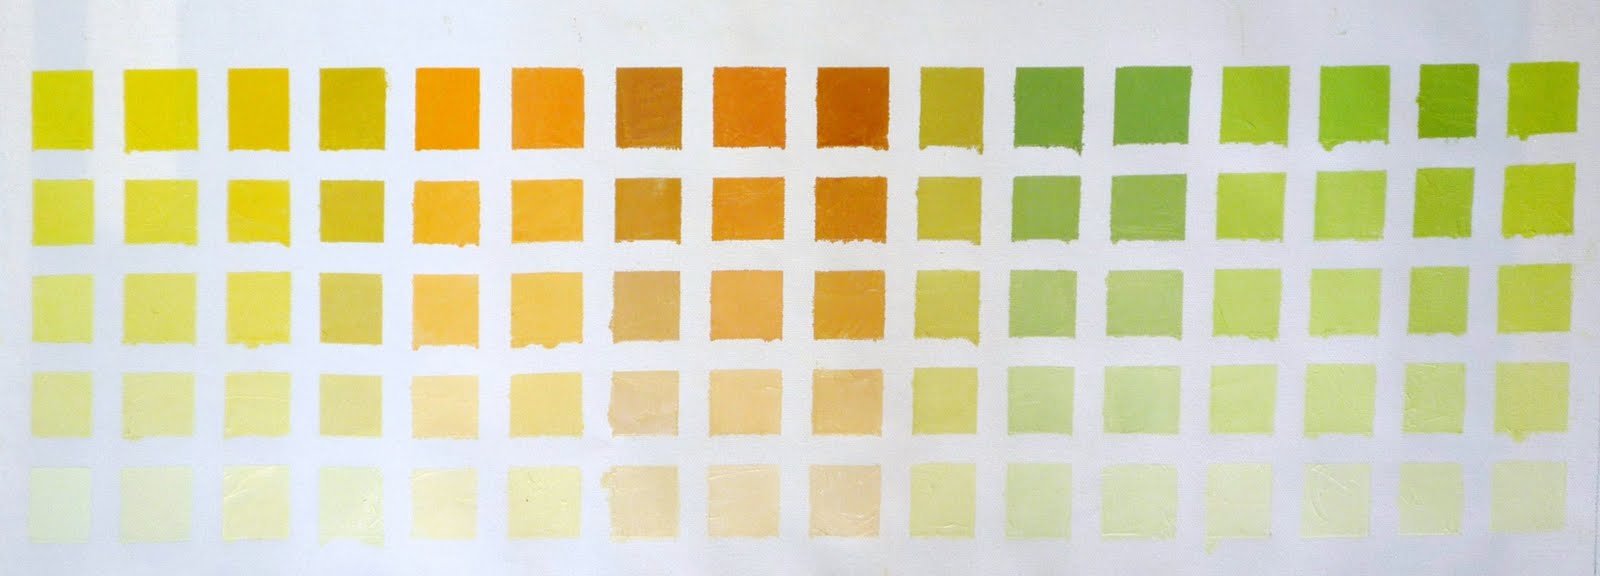 yellow color chart